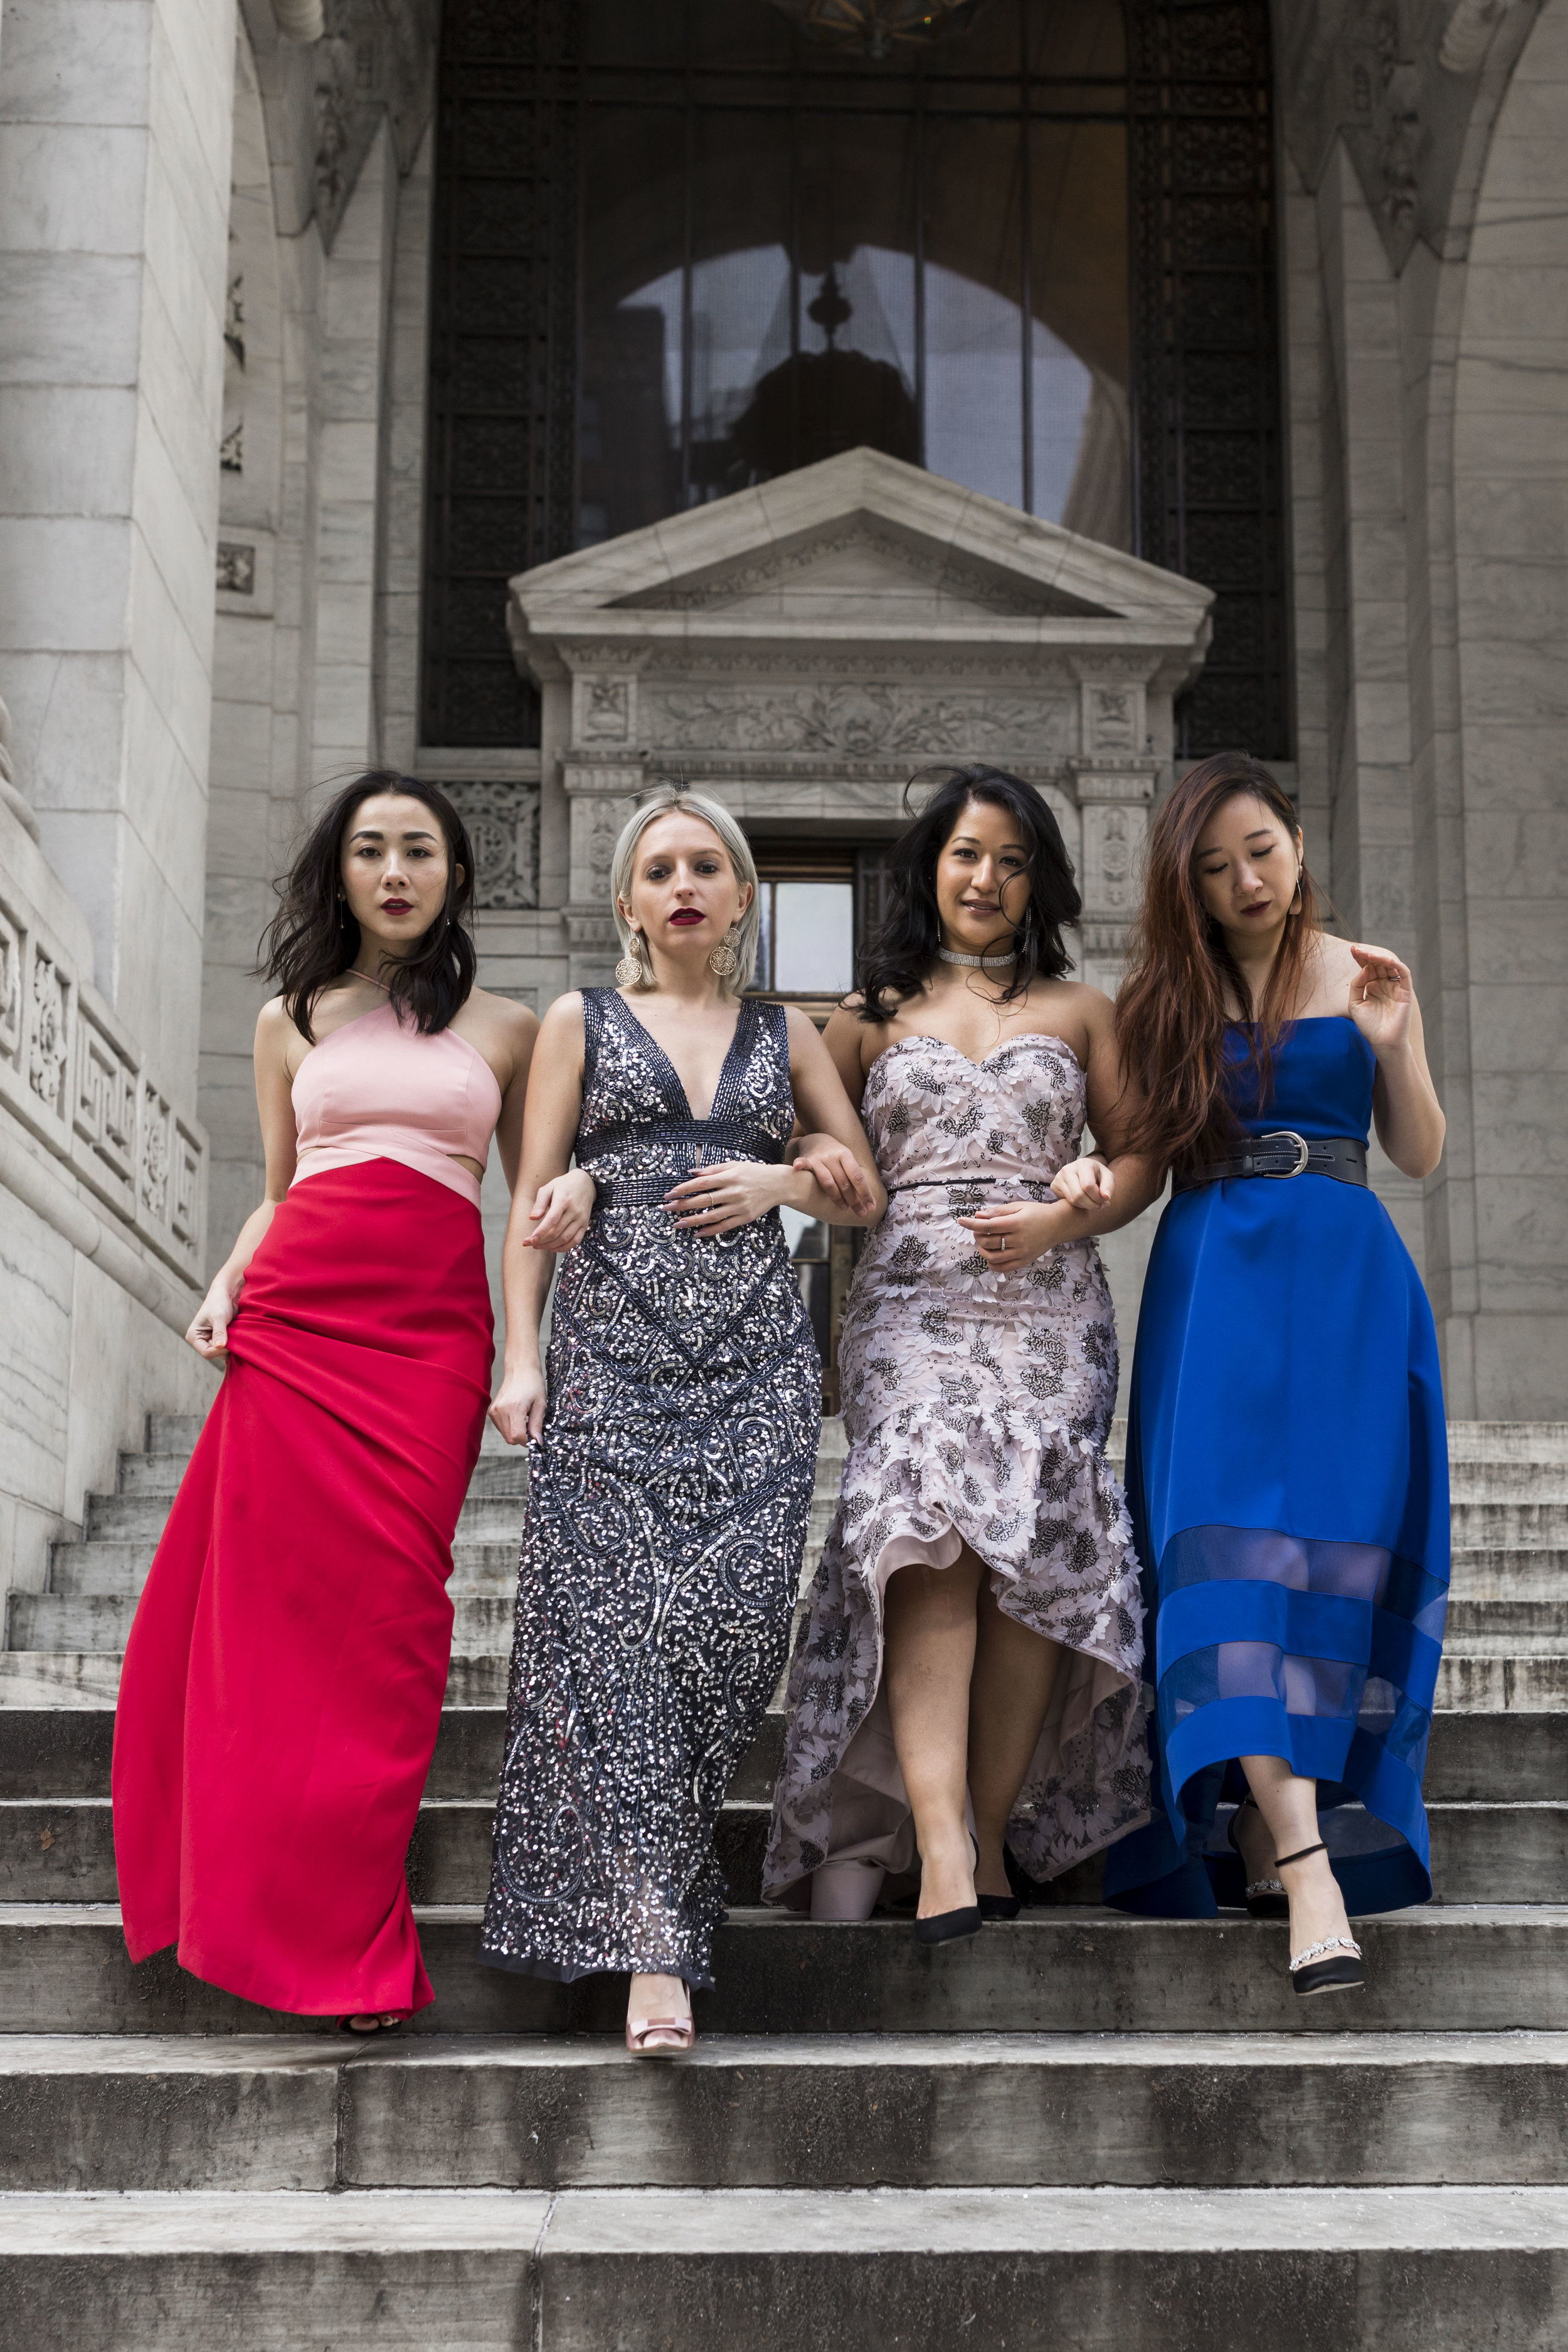 Galentine's Day Outfit Ideas NYPL Galentine Day Photoshoot